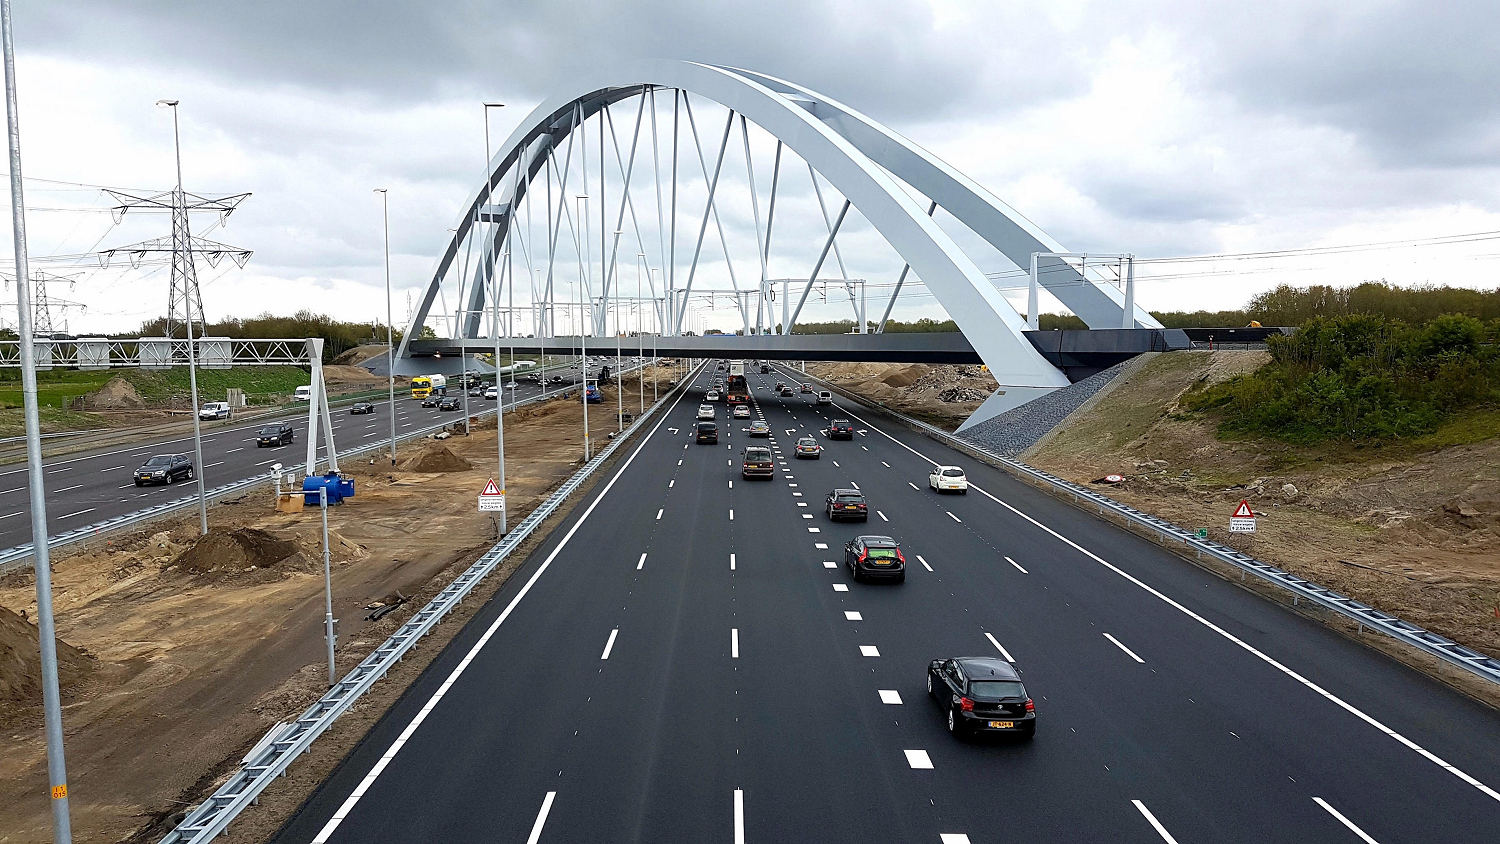 The southern carriageway of the upgraded A1 at Muiderberg